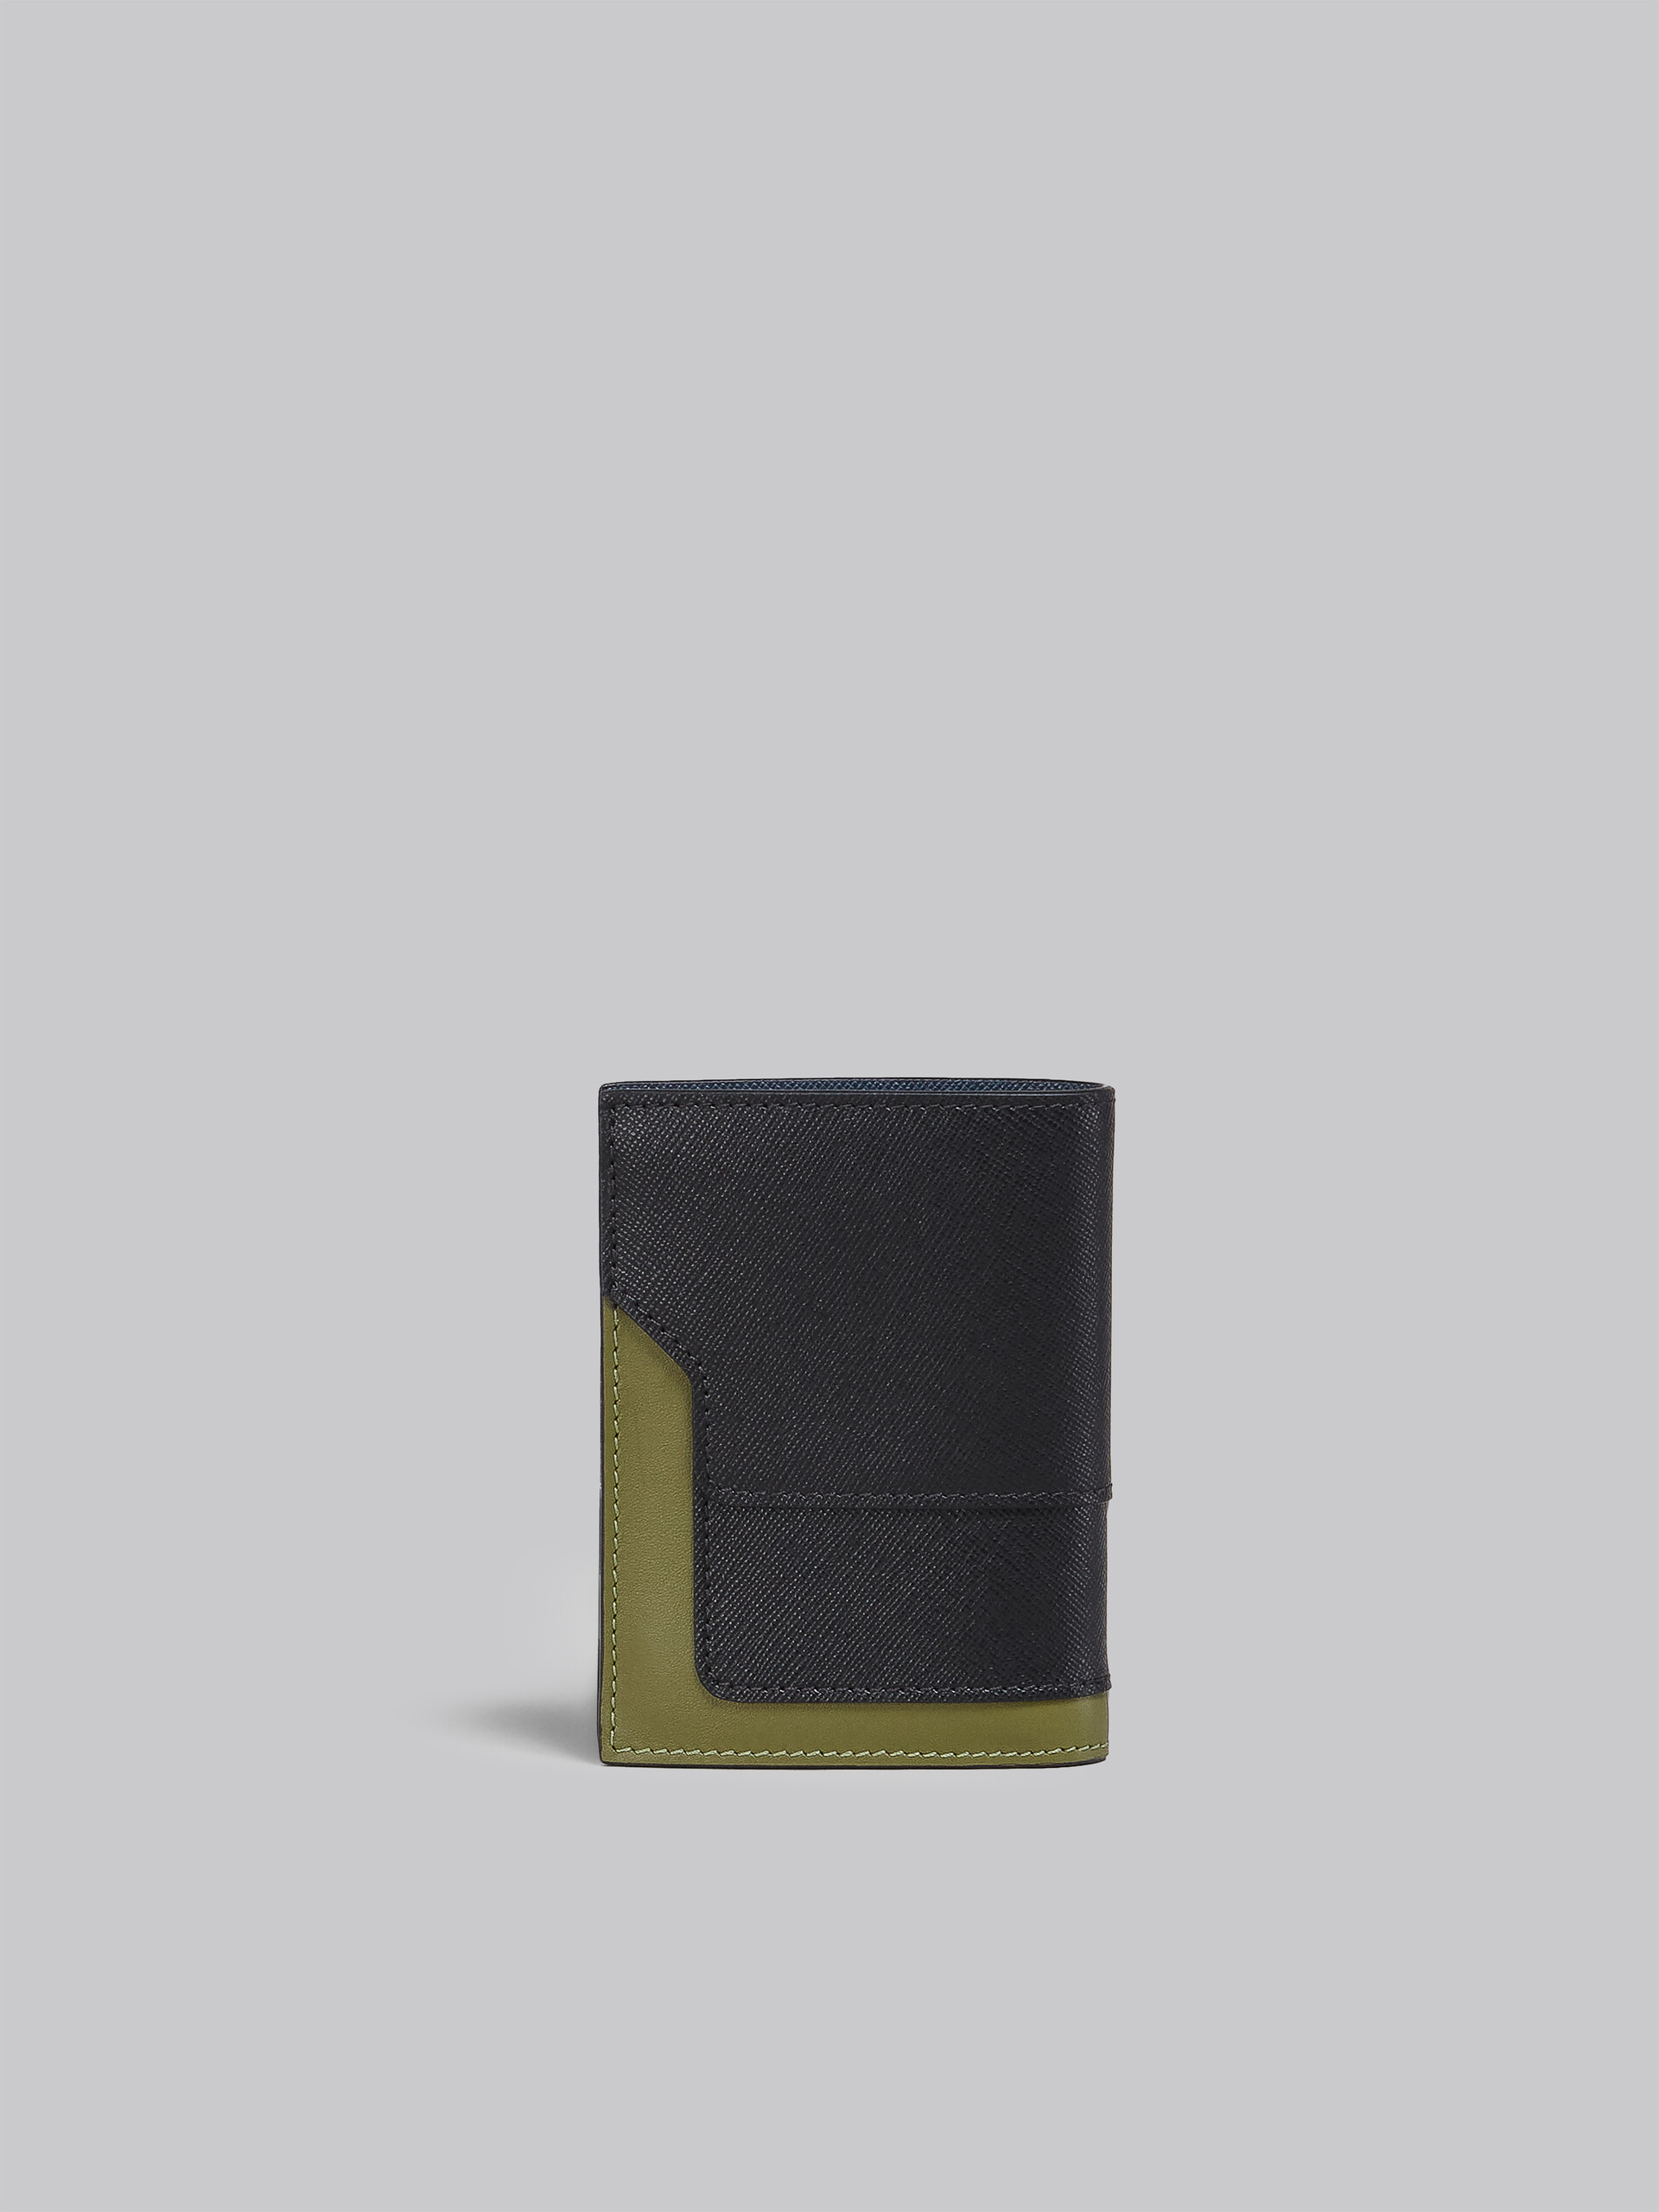 Black green and blue saffiano leather bi-fold wallet - Wallets - Image 3